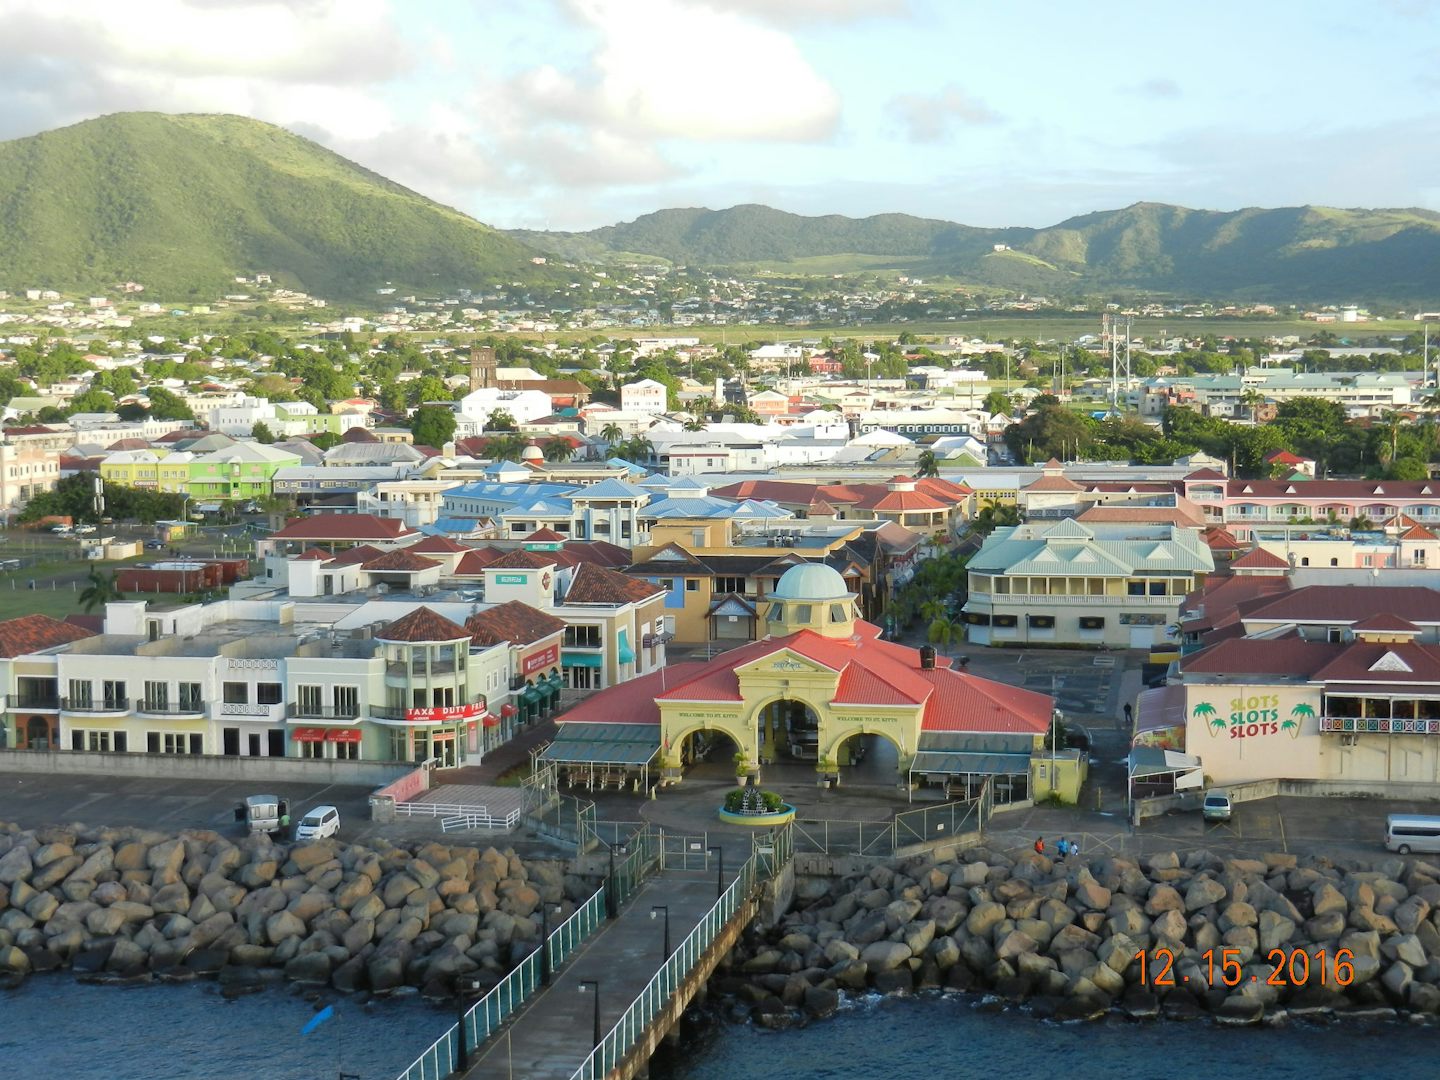 View from our balcony of St. Kitts